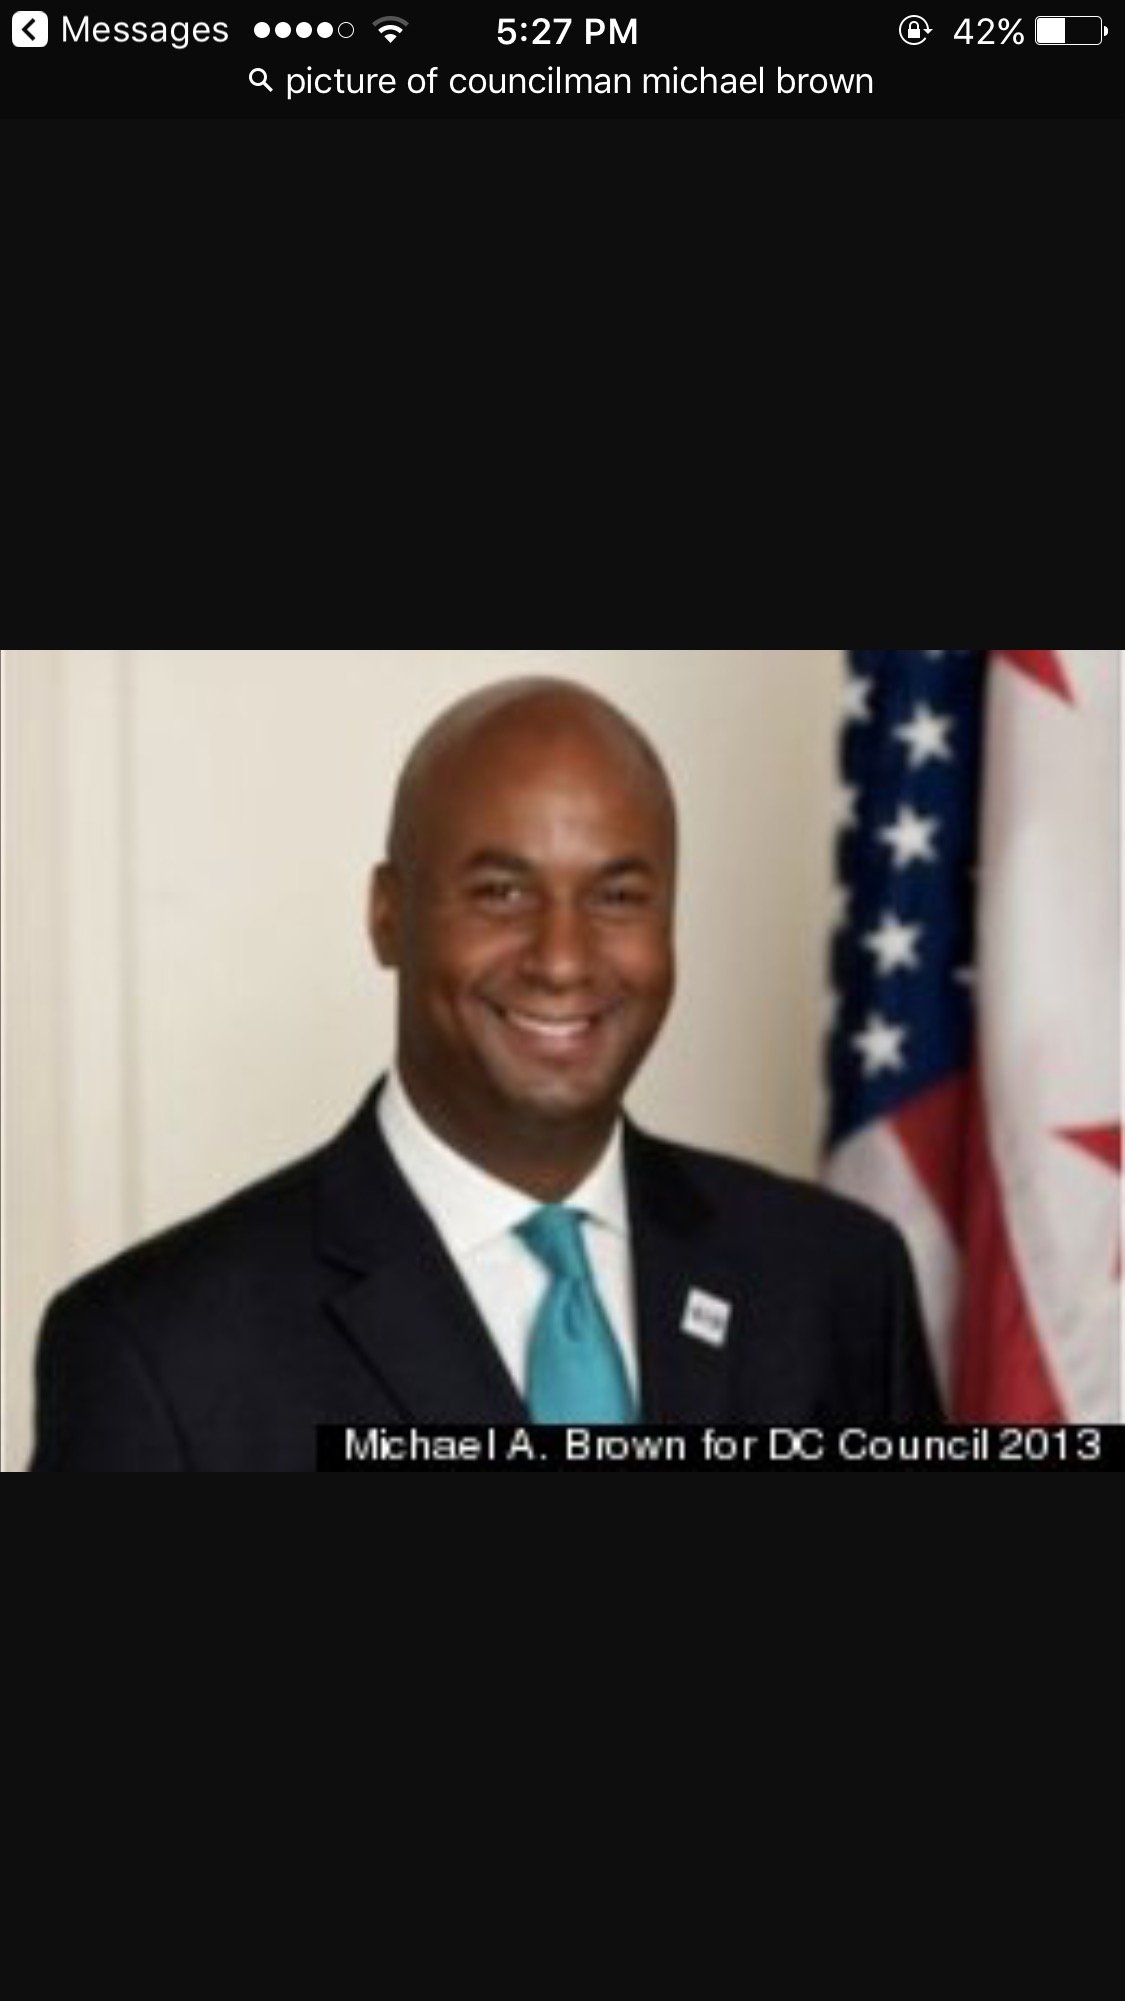 DC City Council (elected in 2008 - 2013). Vice Chair D.C. City Council (11-13);Lobbyist Potomac Int'l Partners. Host of 